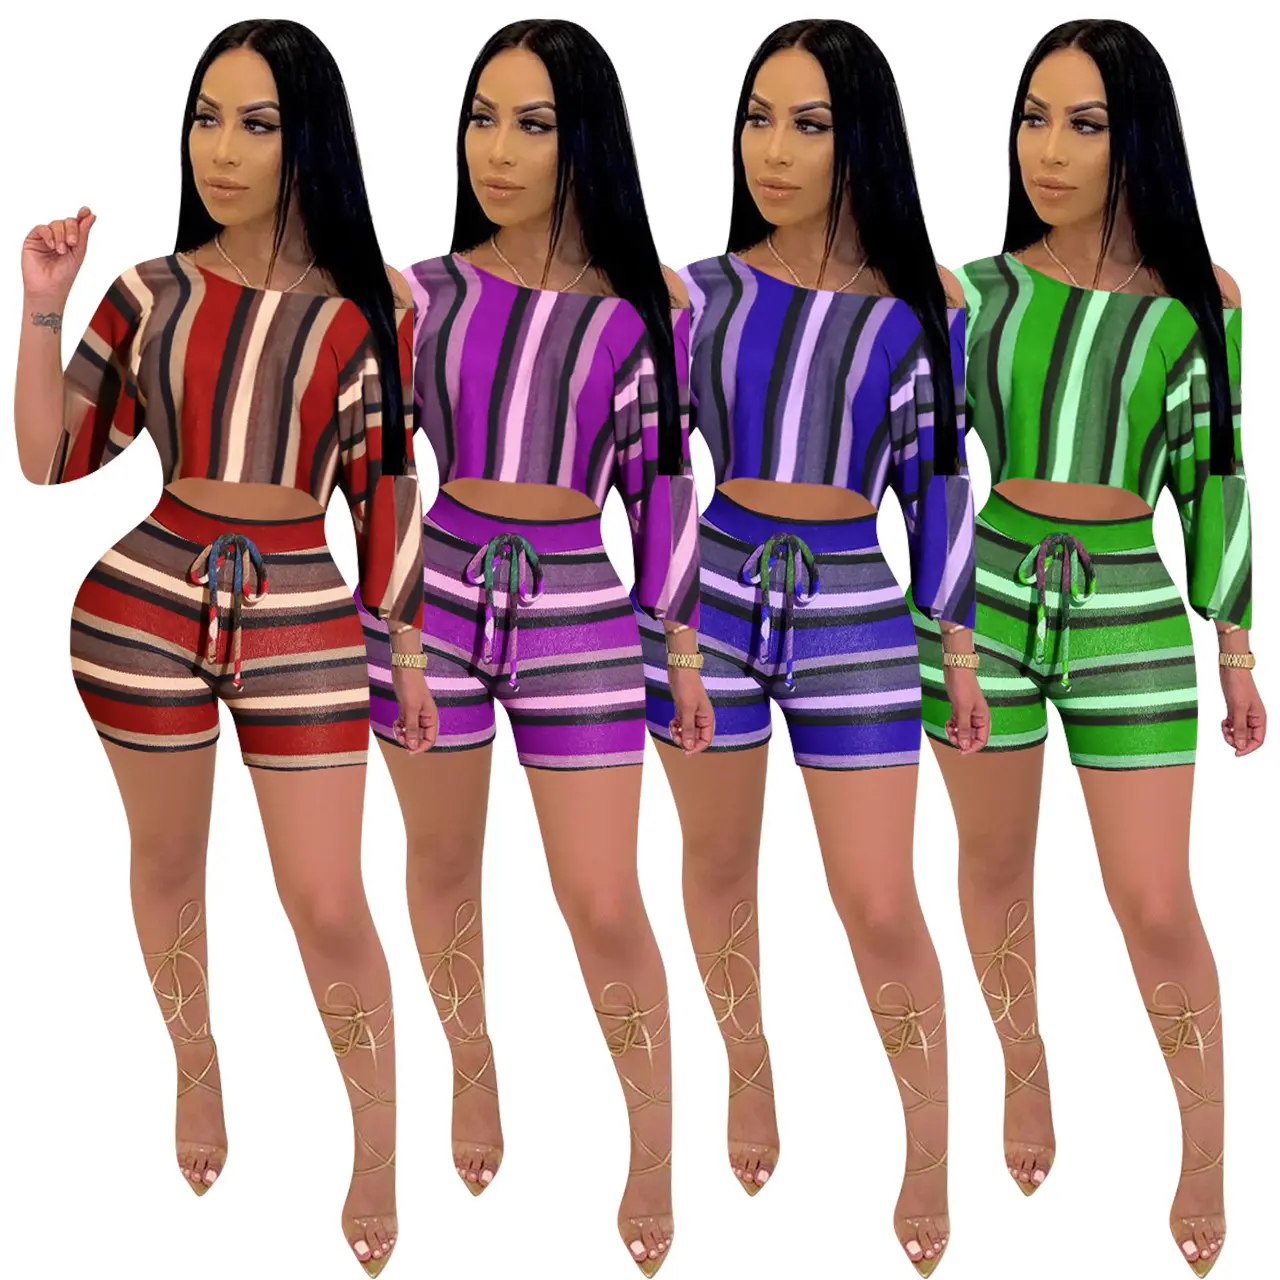 OLAF Hot Sale Women Two piece Sets Mid-sleeve Crop Top And Shorts Colorful Stripe Printed 2 Piece Short Set Women Clothing